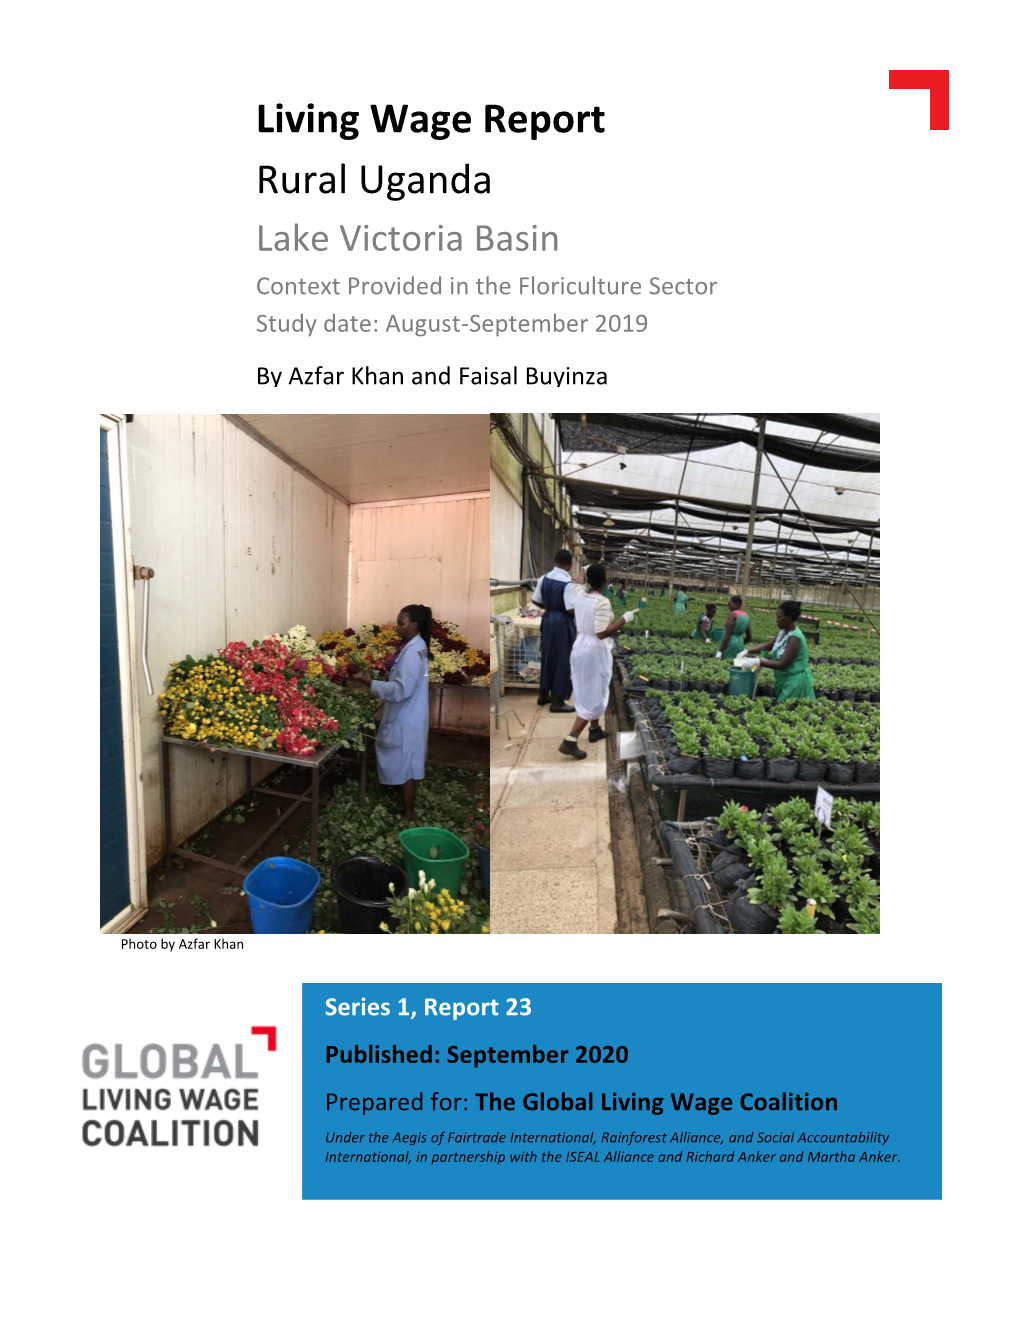 Living Wage Report Rural Uganda Lake Victoria Basin Context Provided in the Floriculture Industry